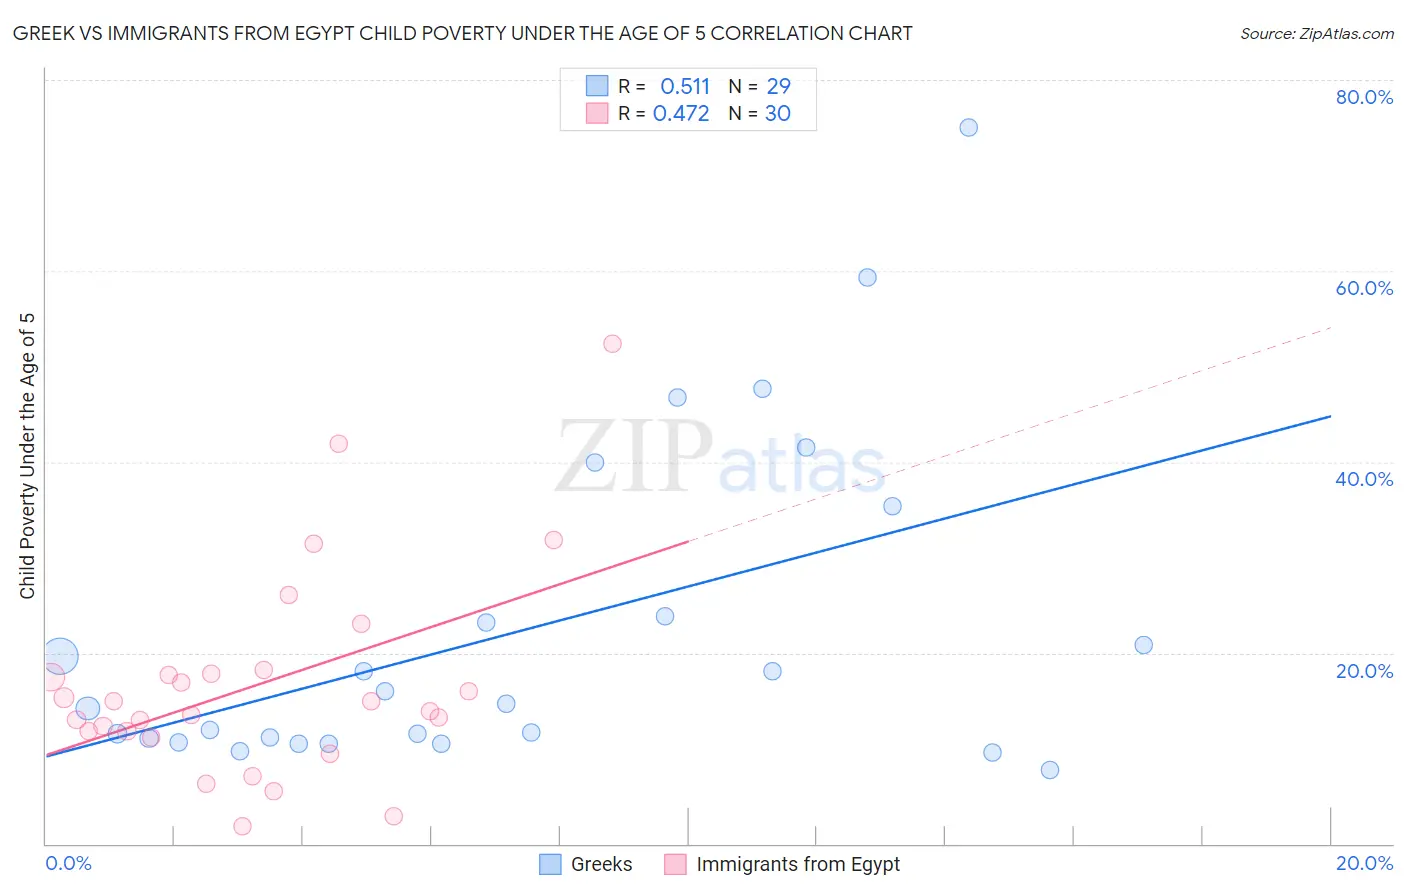 Greek vs Immigrants from Egypt Child Poverty Under the Age of 5